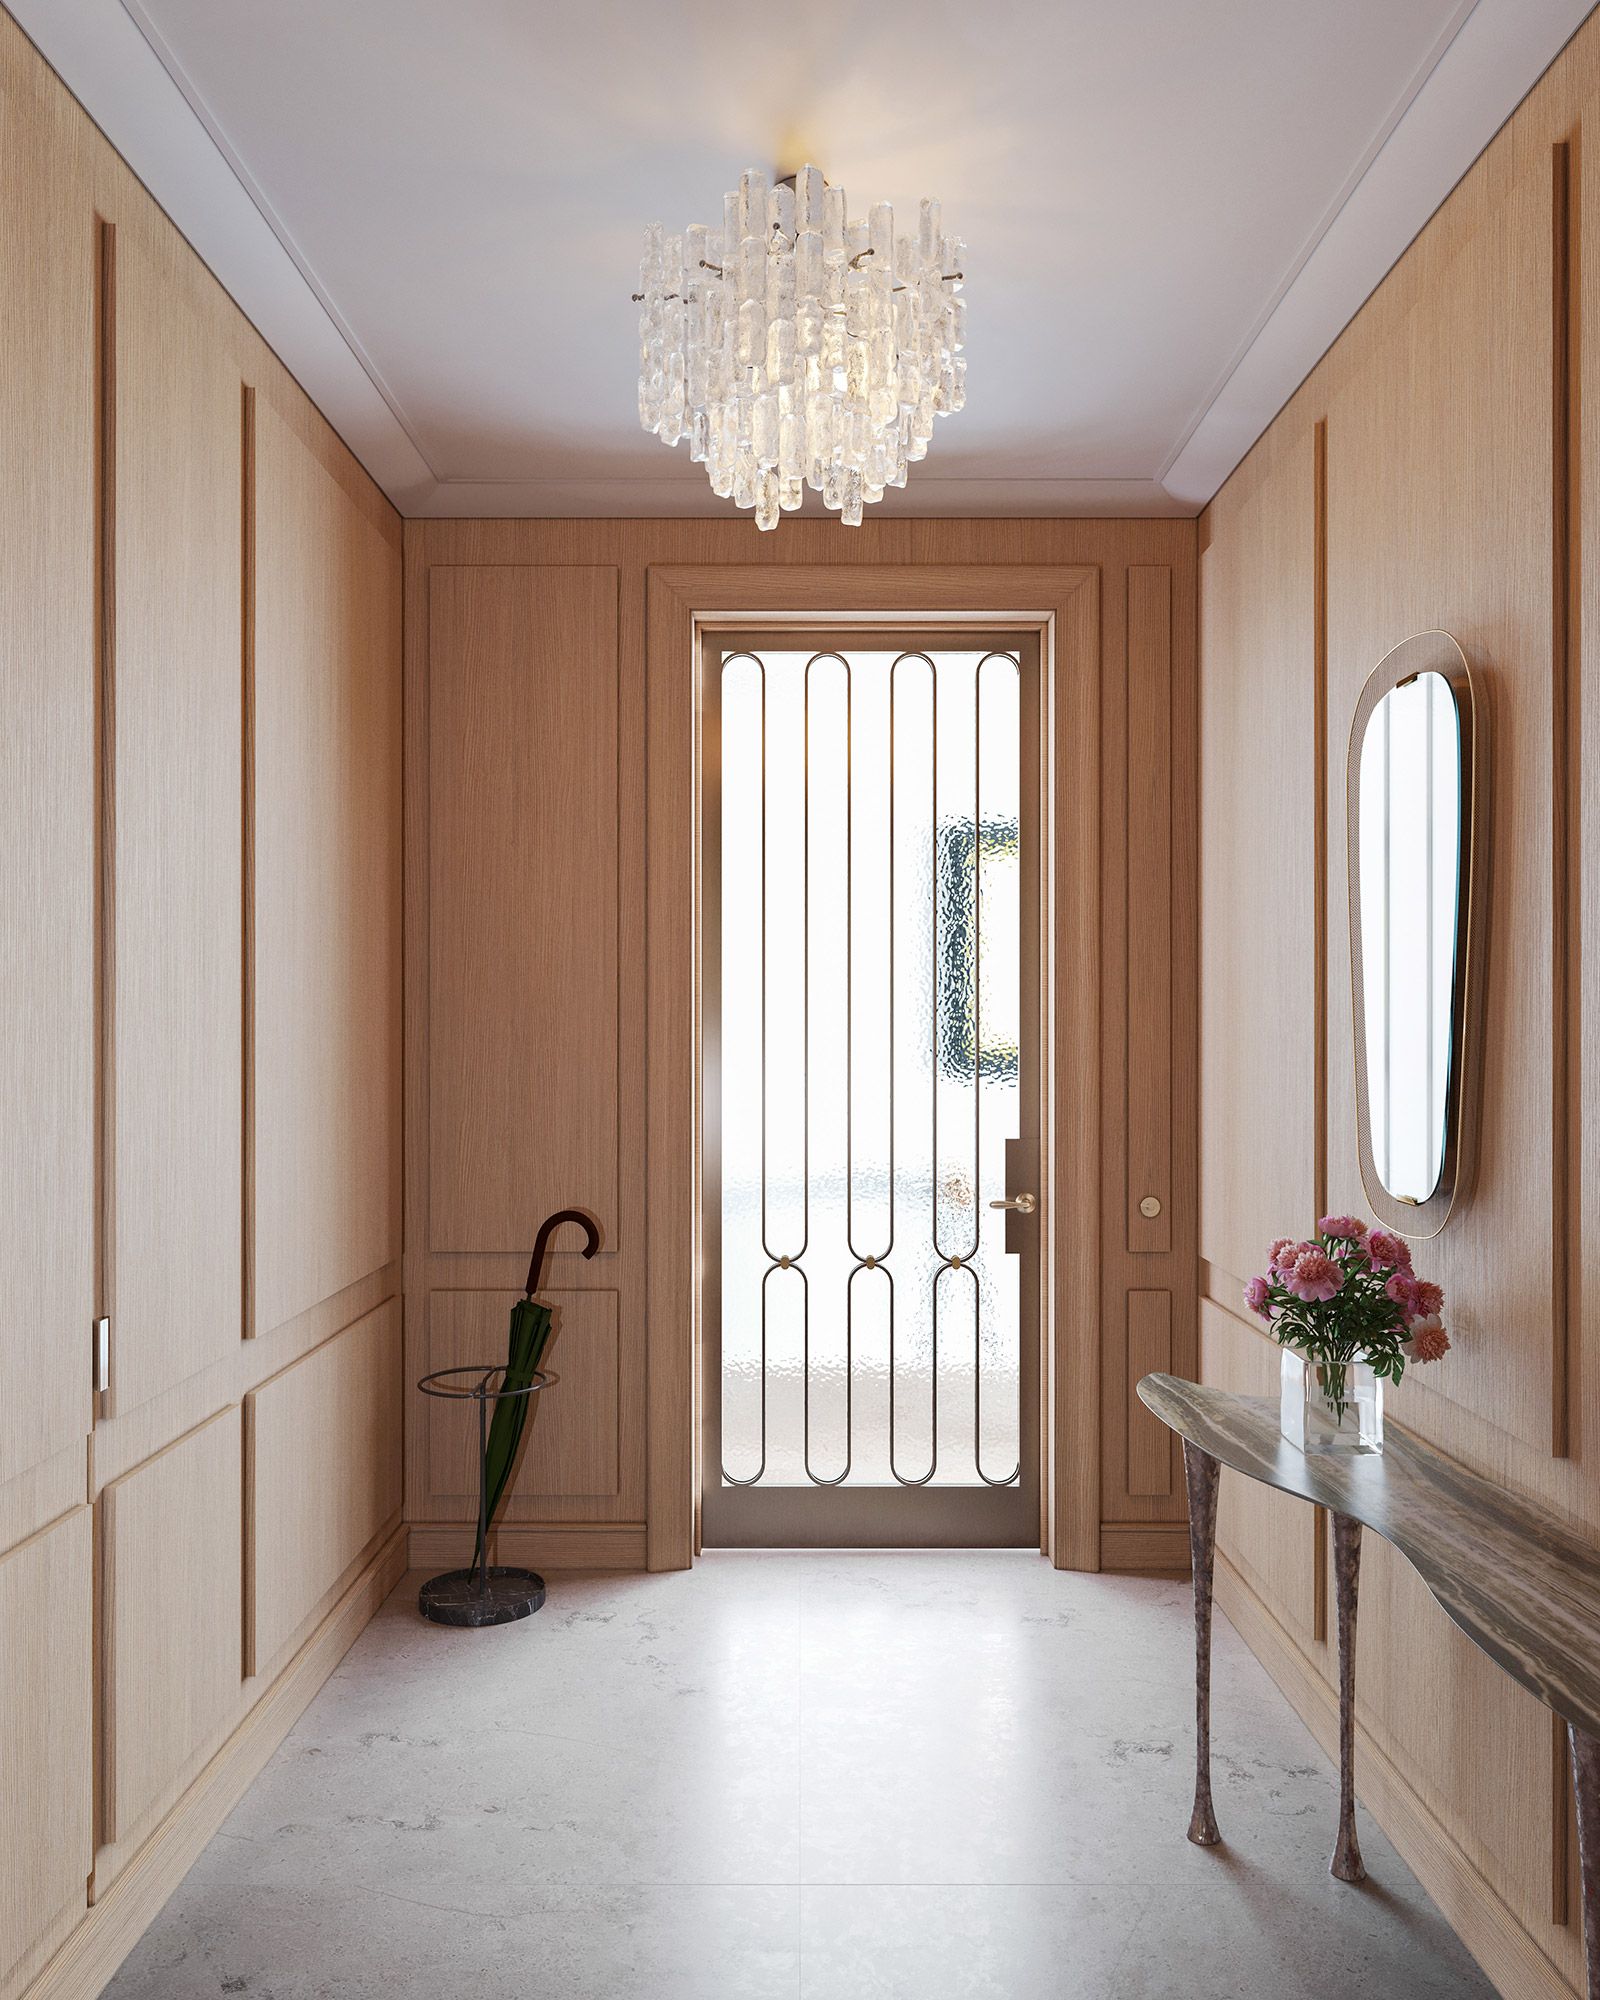 Full and half-floor residences feature private entry vestibules paneled in wire-brushed European oak